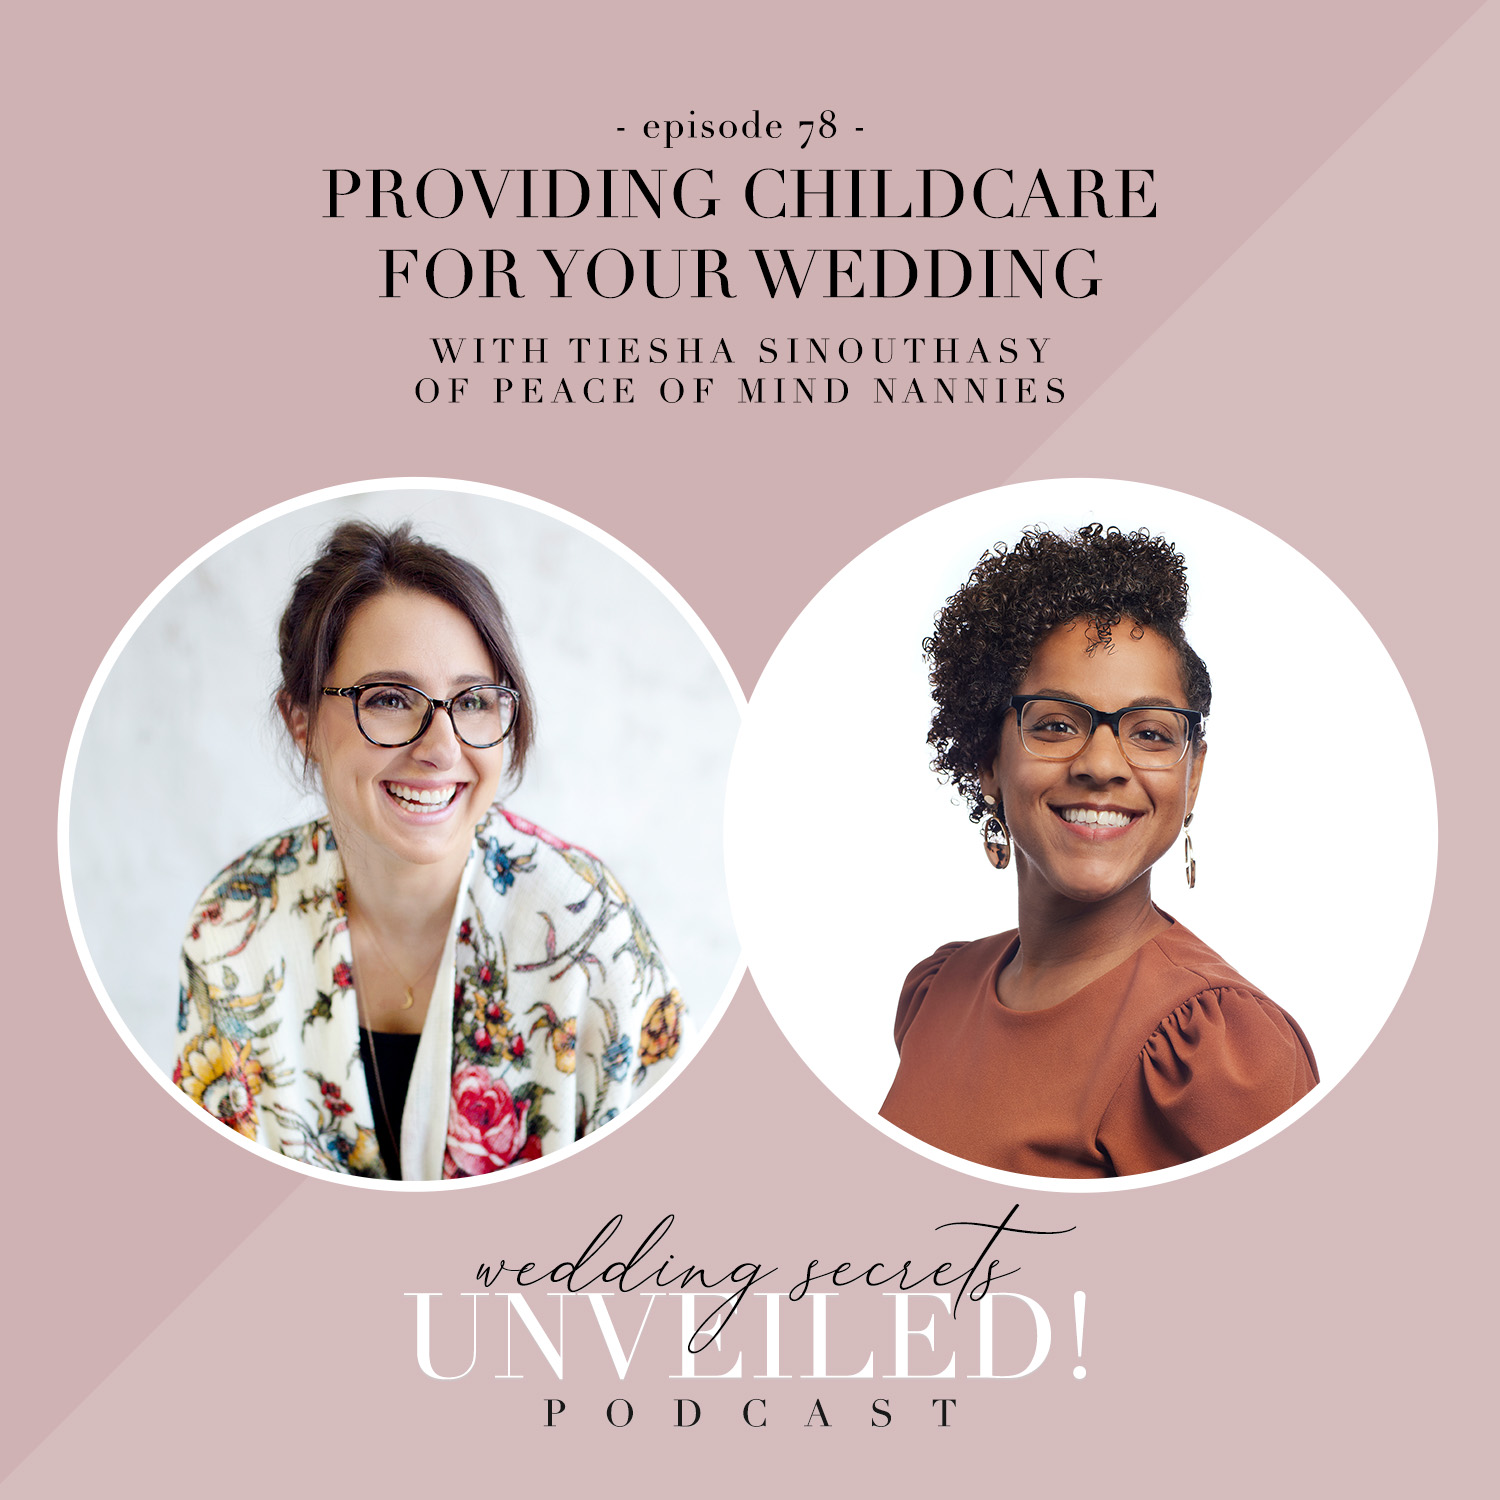 Providing Childcare for Your Wedding: an interview with Tiesha Sinouthasy of Peace of Mind Nannies on Wedding Secrets Unveiled! podcast